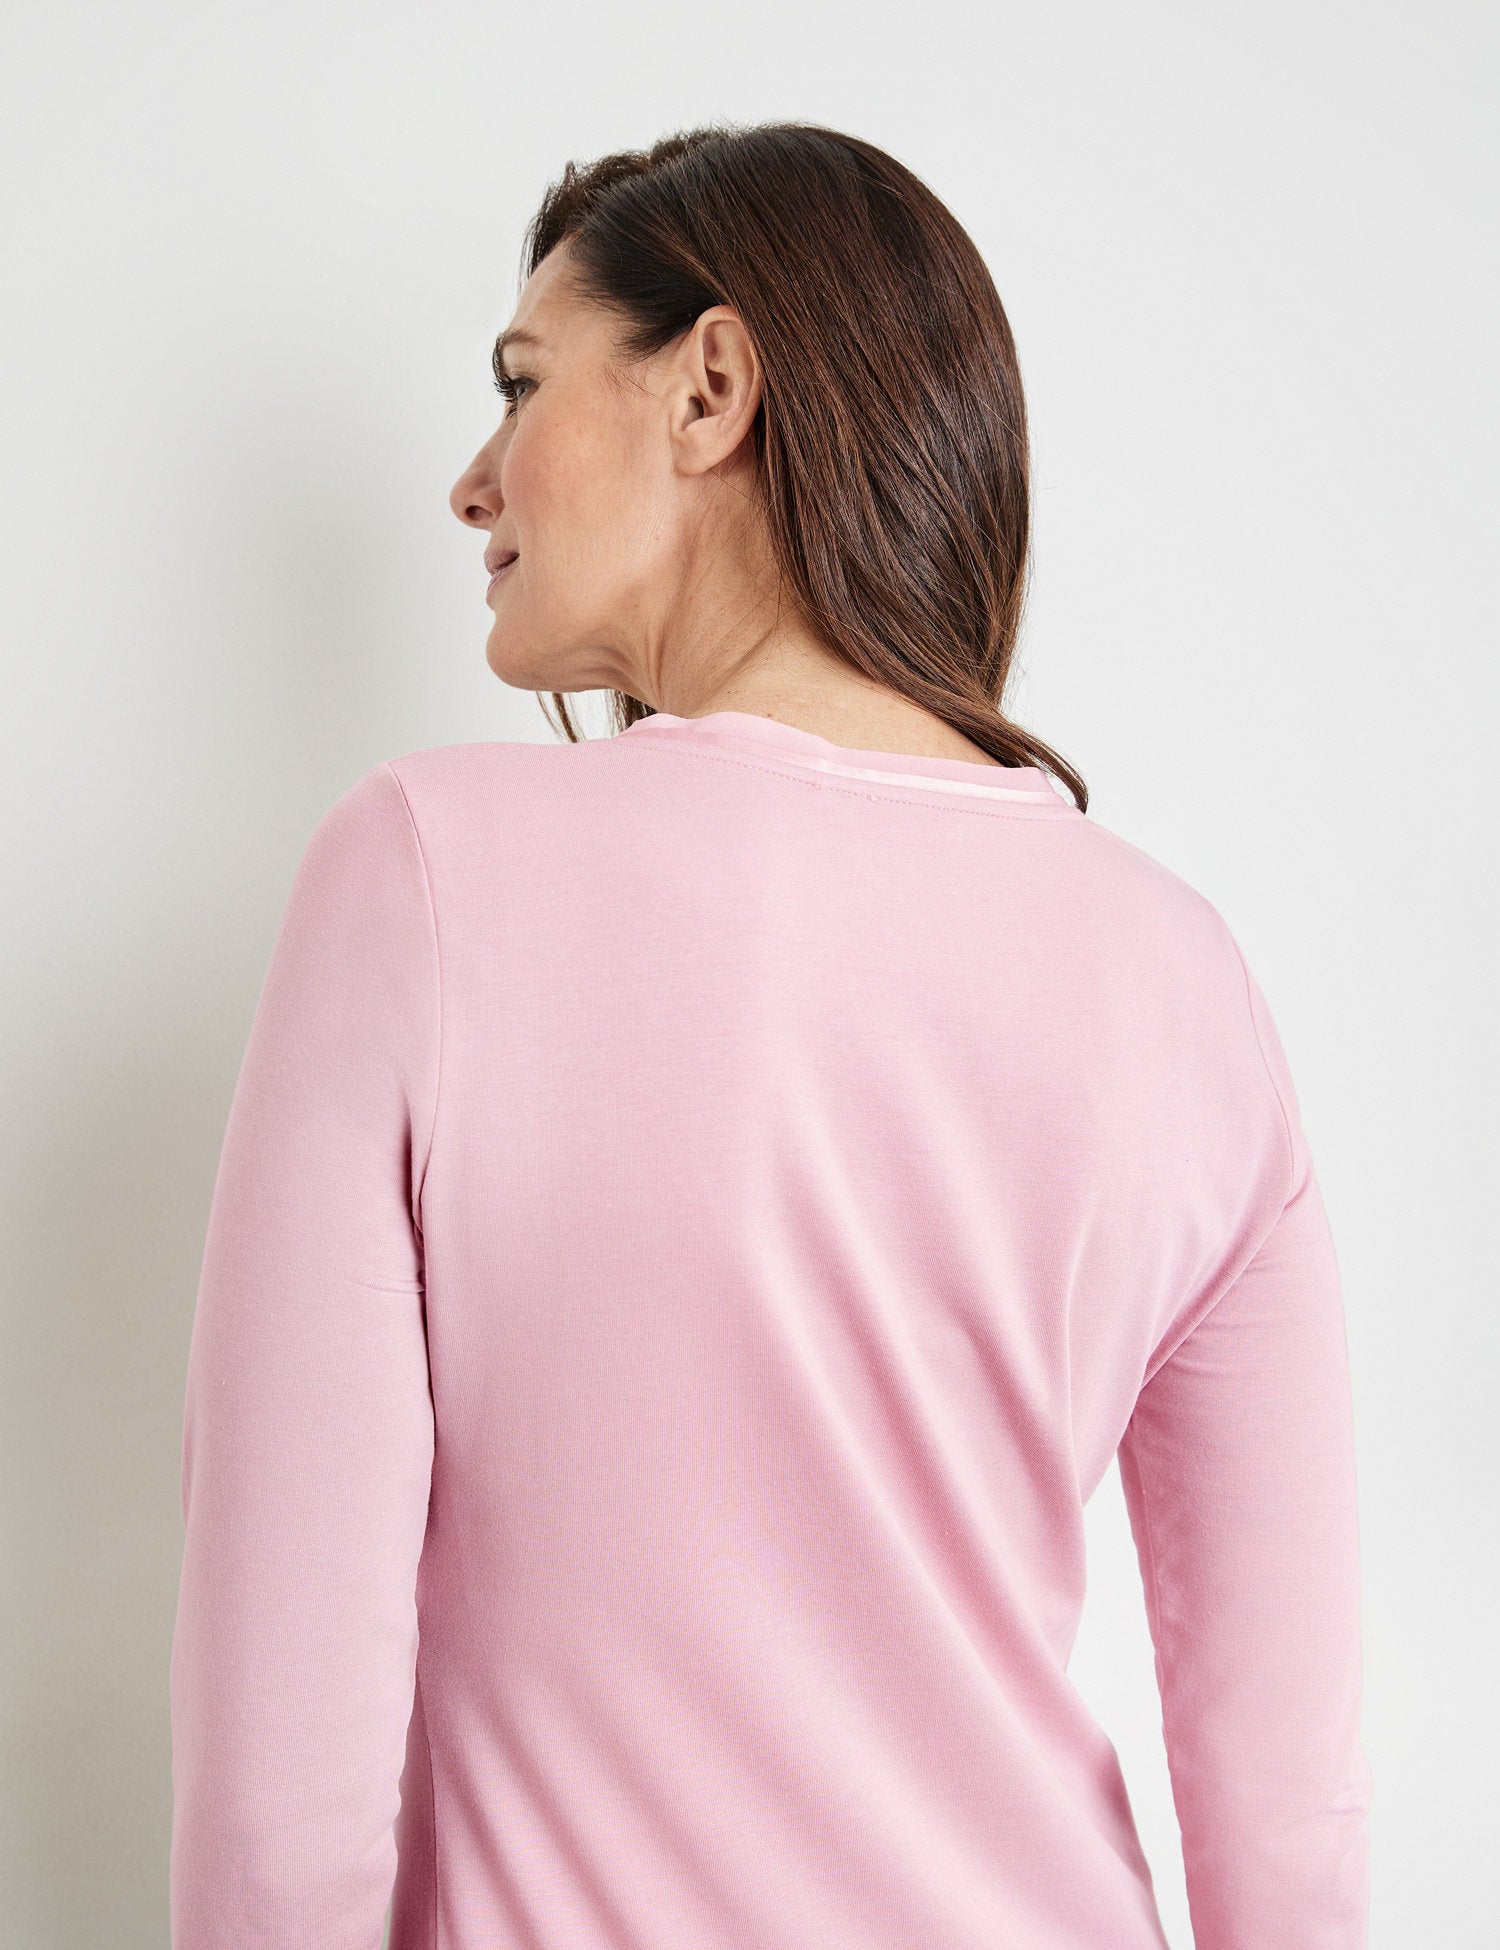 Long Sleeve Top With A Sheer Neckline Trim_370294-35060_30916_06